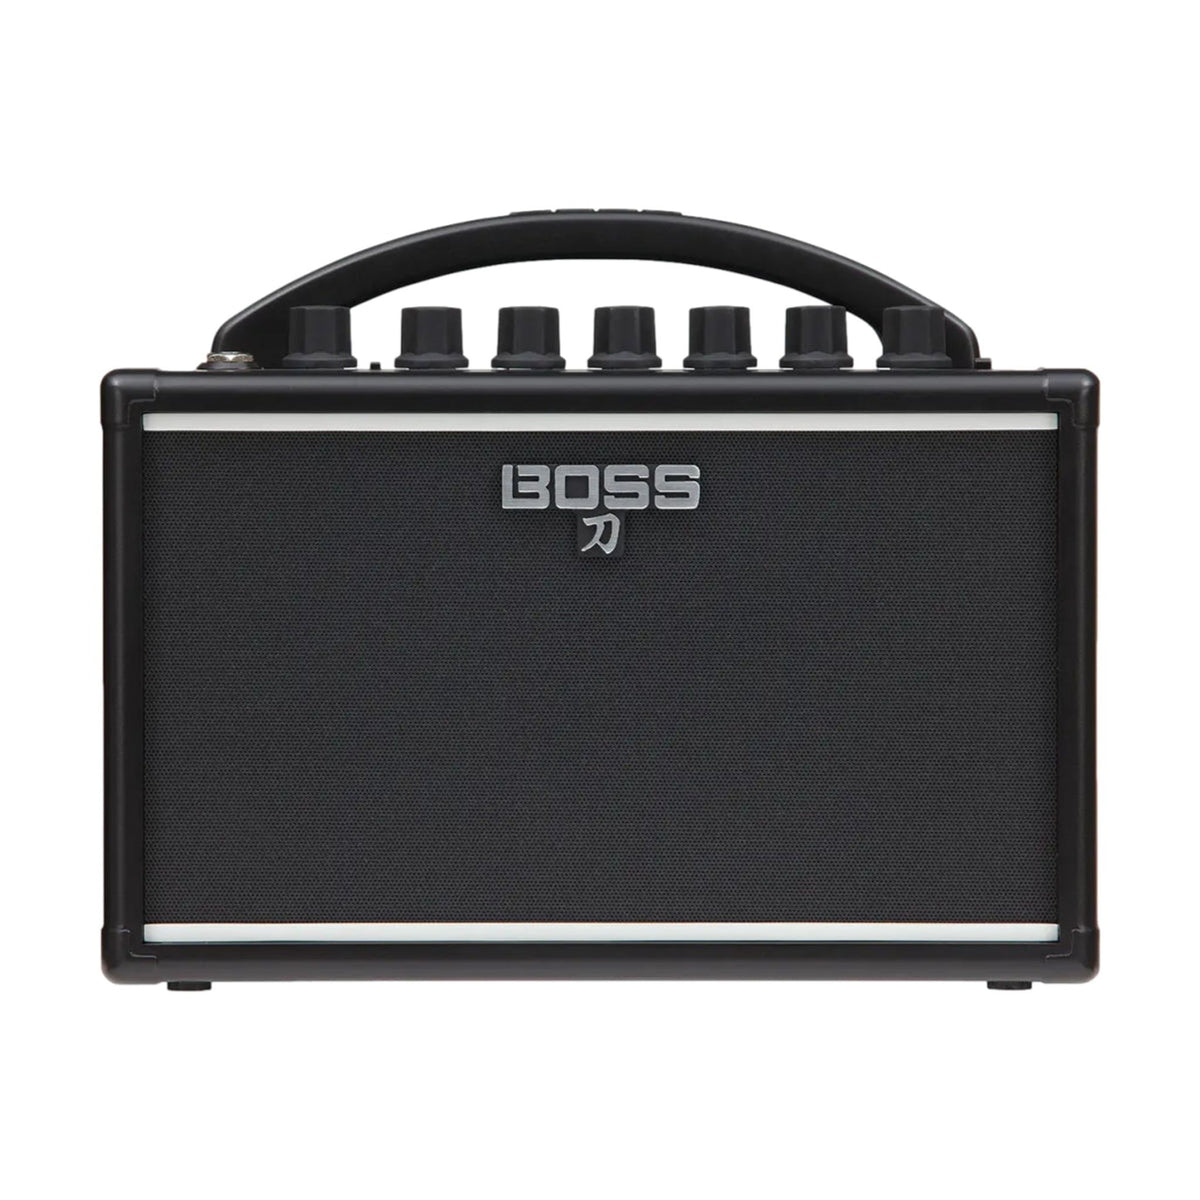 BOSS Katana amps have received accolades from guitarists everywhere for their fantastic sound and feel, onboard effects, and great value. Now, the Katana-Mini makes serious Katana tone accessible in a small, go-anywhere amp that runs on batteries.